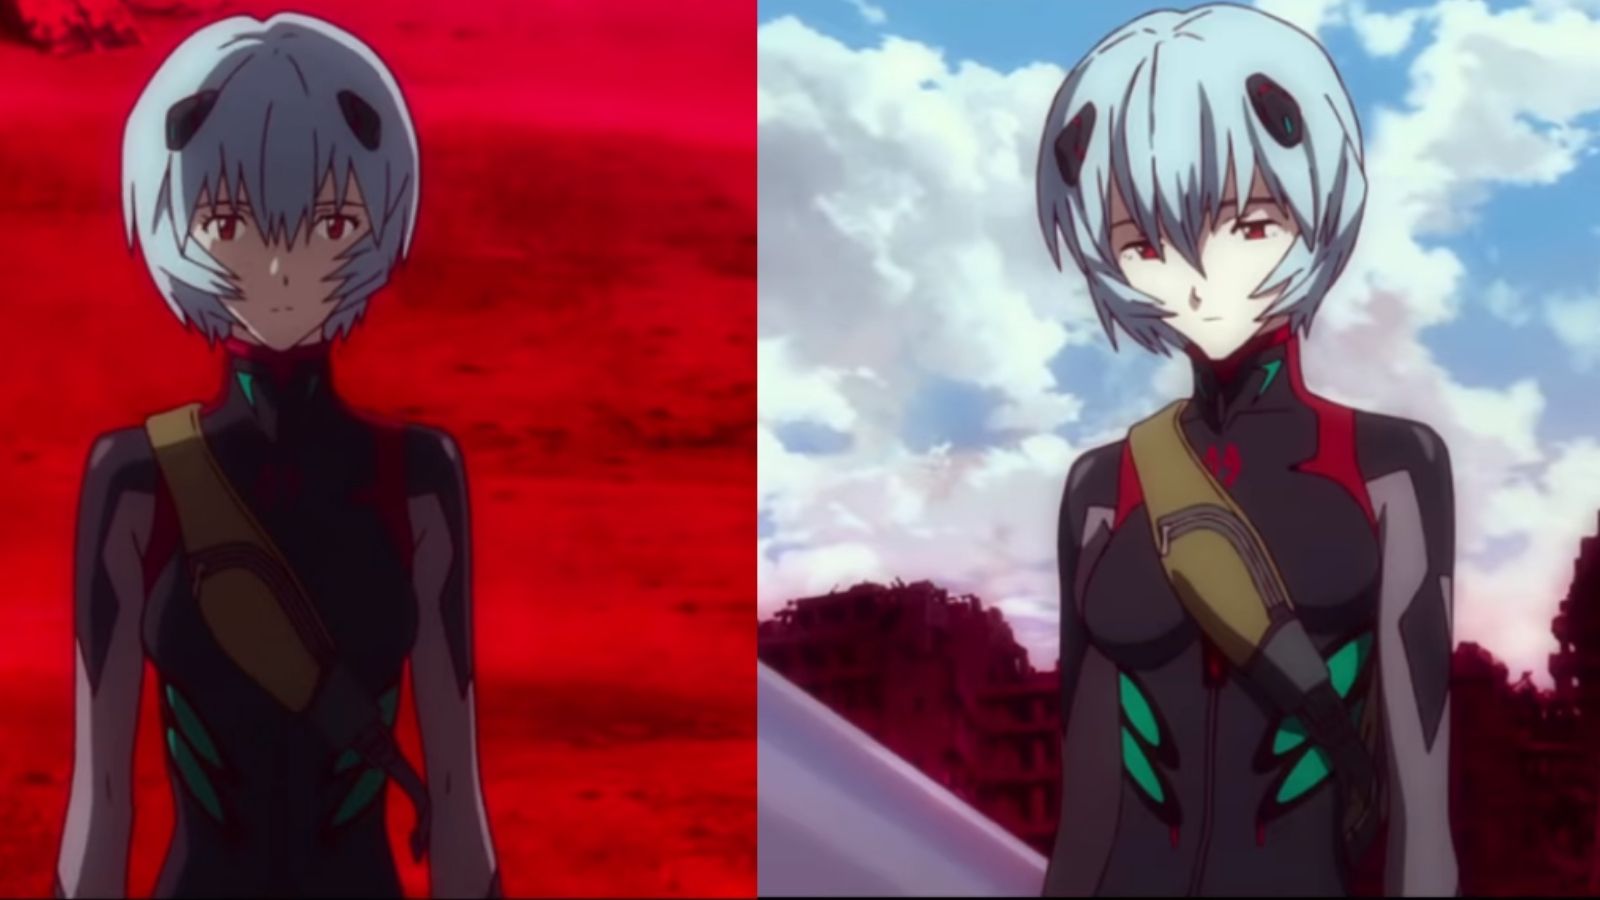 15 Most anticipated anime shows of 2021: Look out for Evangelion 3.0